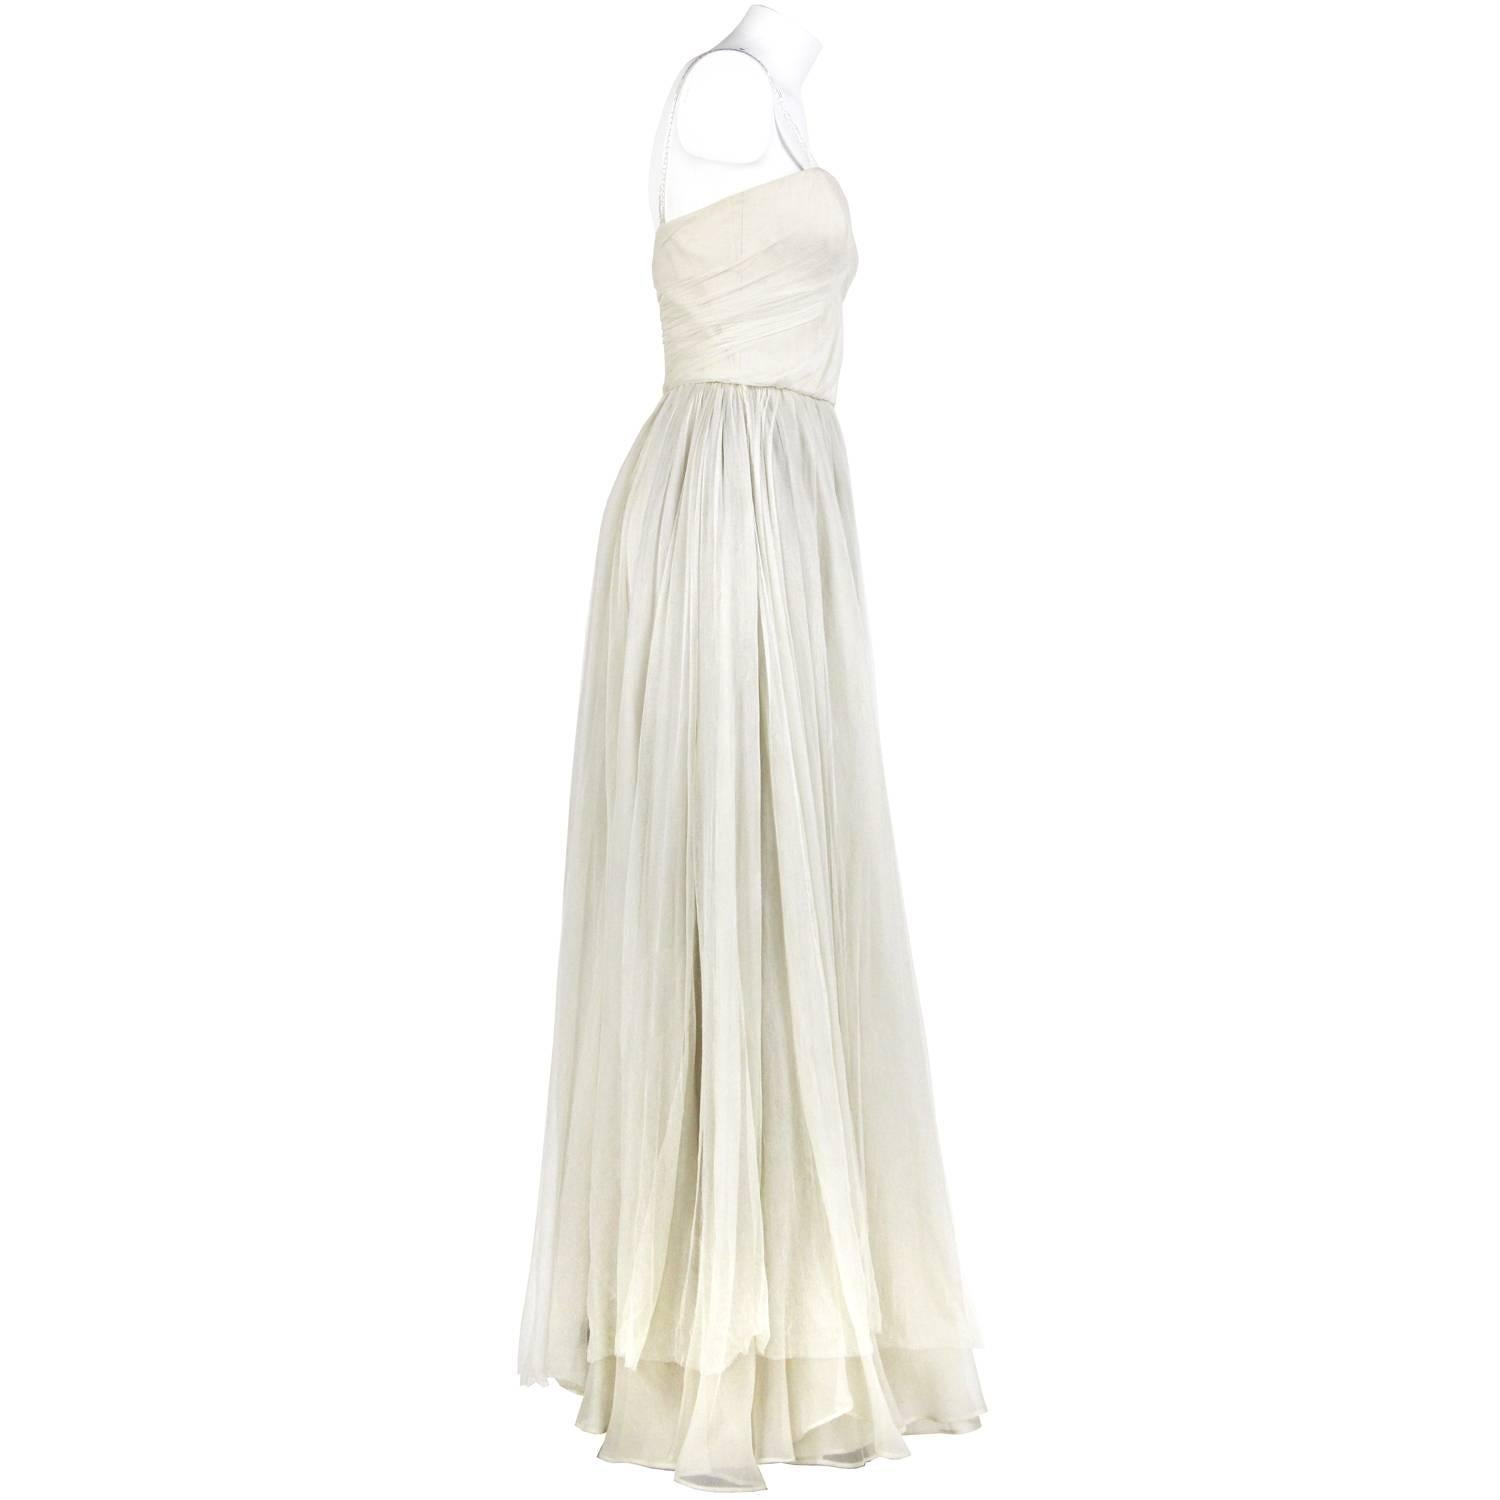 Beautiful Dolce & Gabbana wedding dress in ivory white silk tulle veil. It features beaded shoulder straps, sweetheart neckline, a wide skirt and zip closure on the back. The item is vintage, it was produced in the 2000s and is in very good